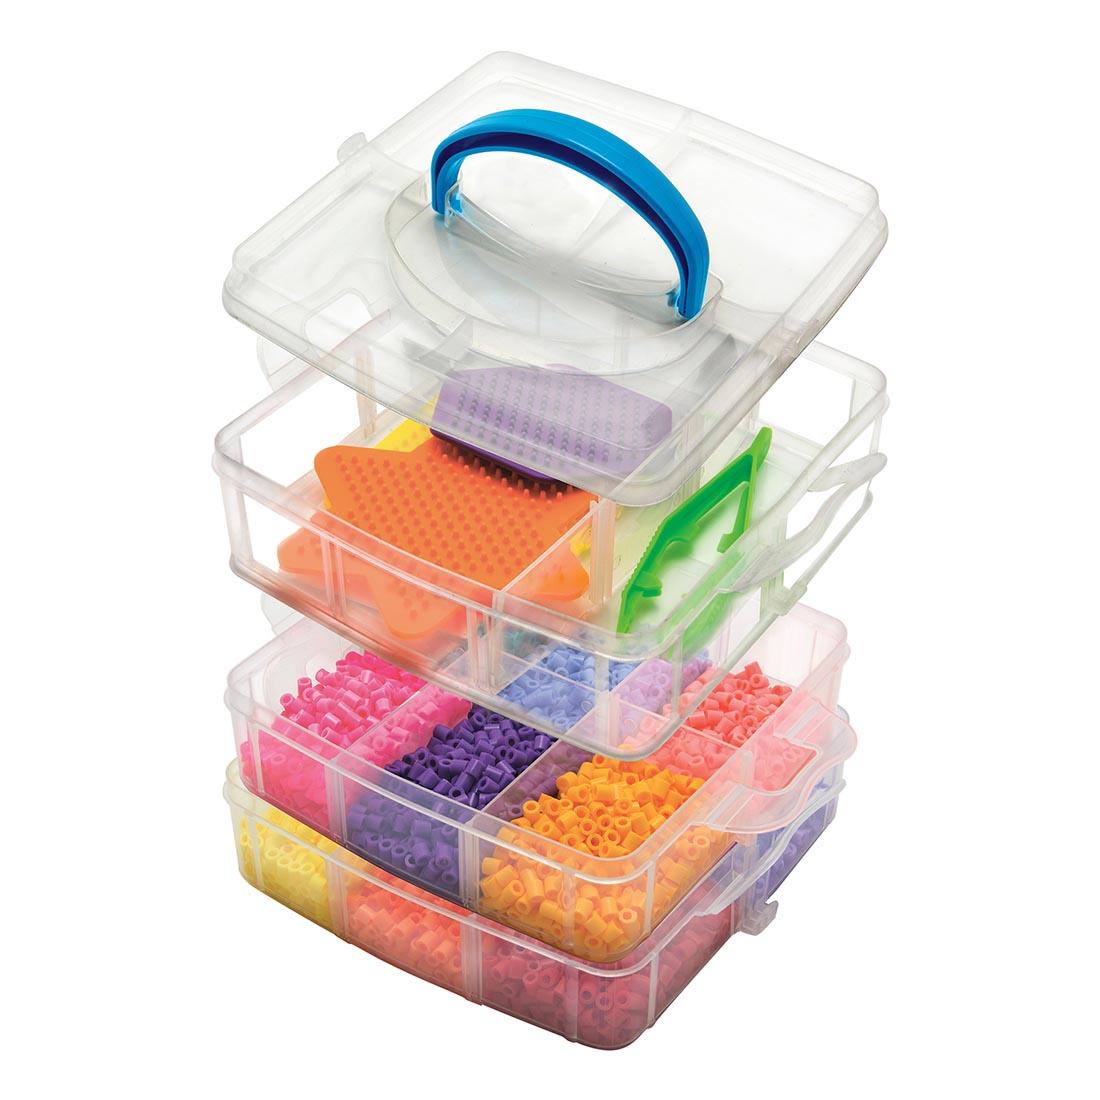 Perler Beads Stackable Storage Trays shown with suggested contents